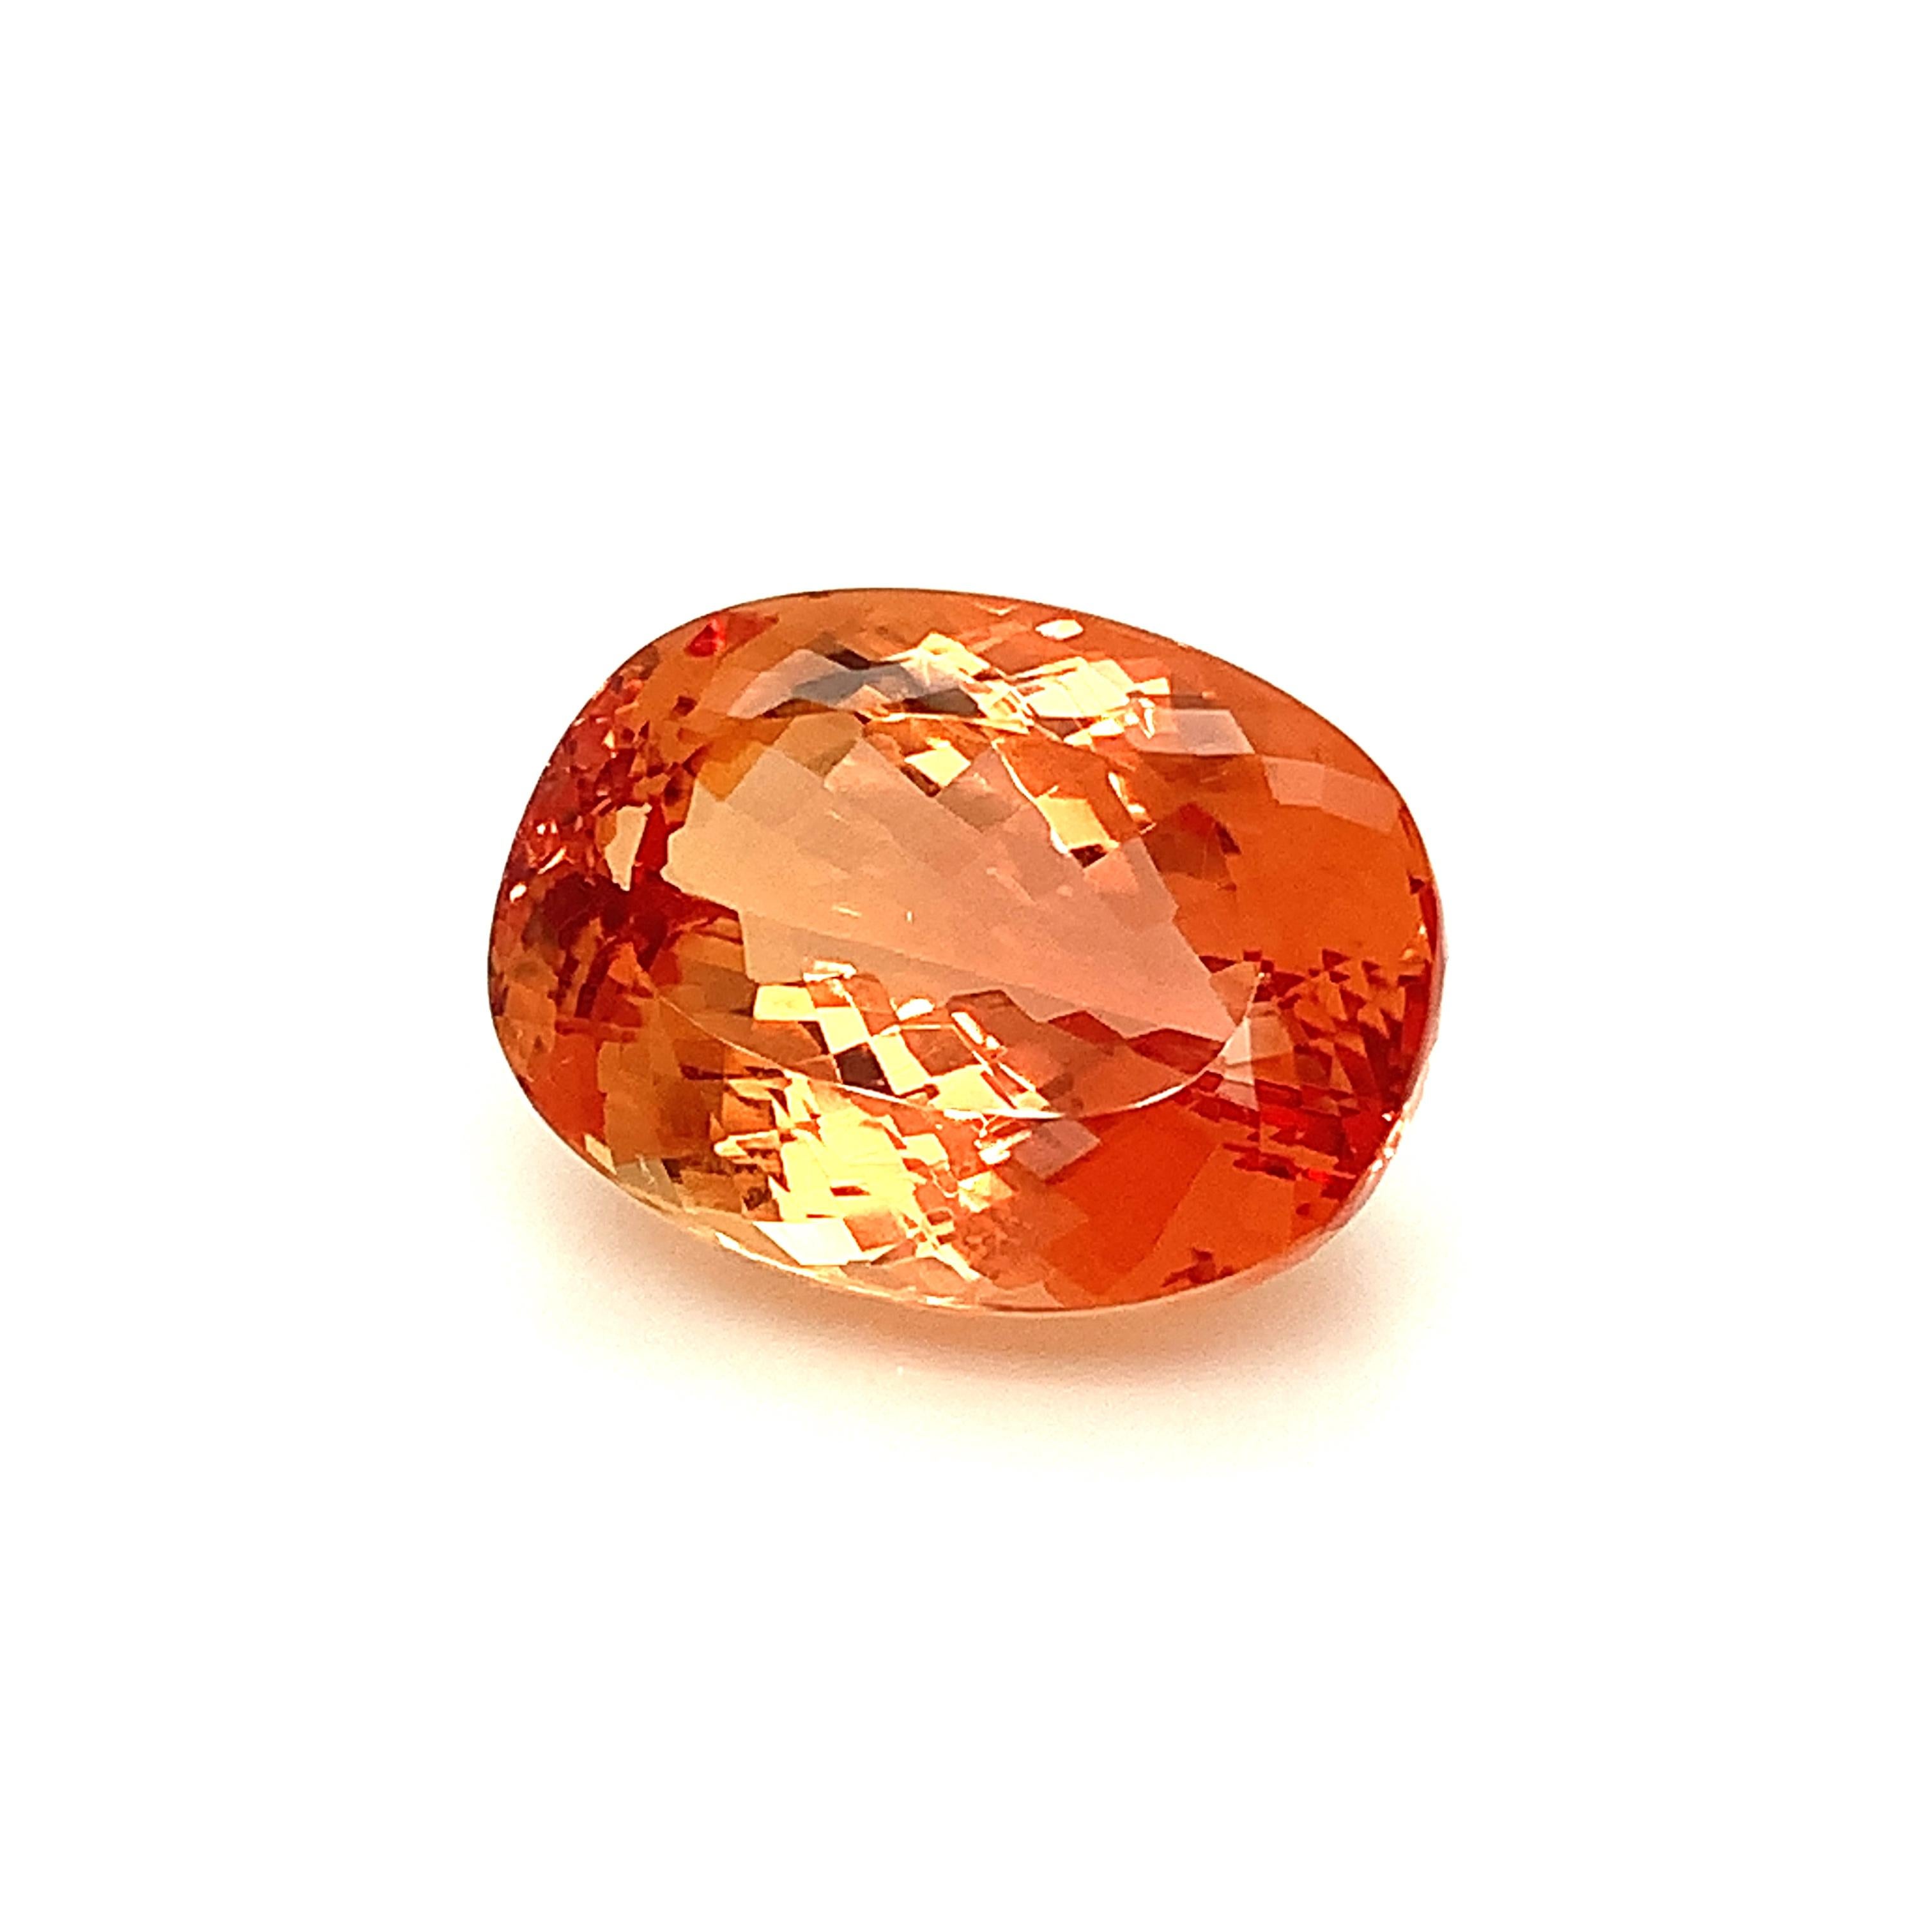 33.95 Carat Imperial Topaz Cushion, Unset Loose Gemstone, GIA Certified For Sale 1